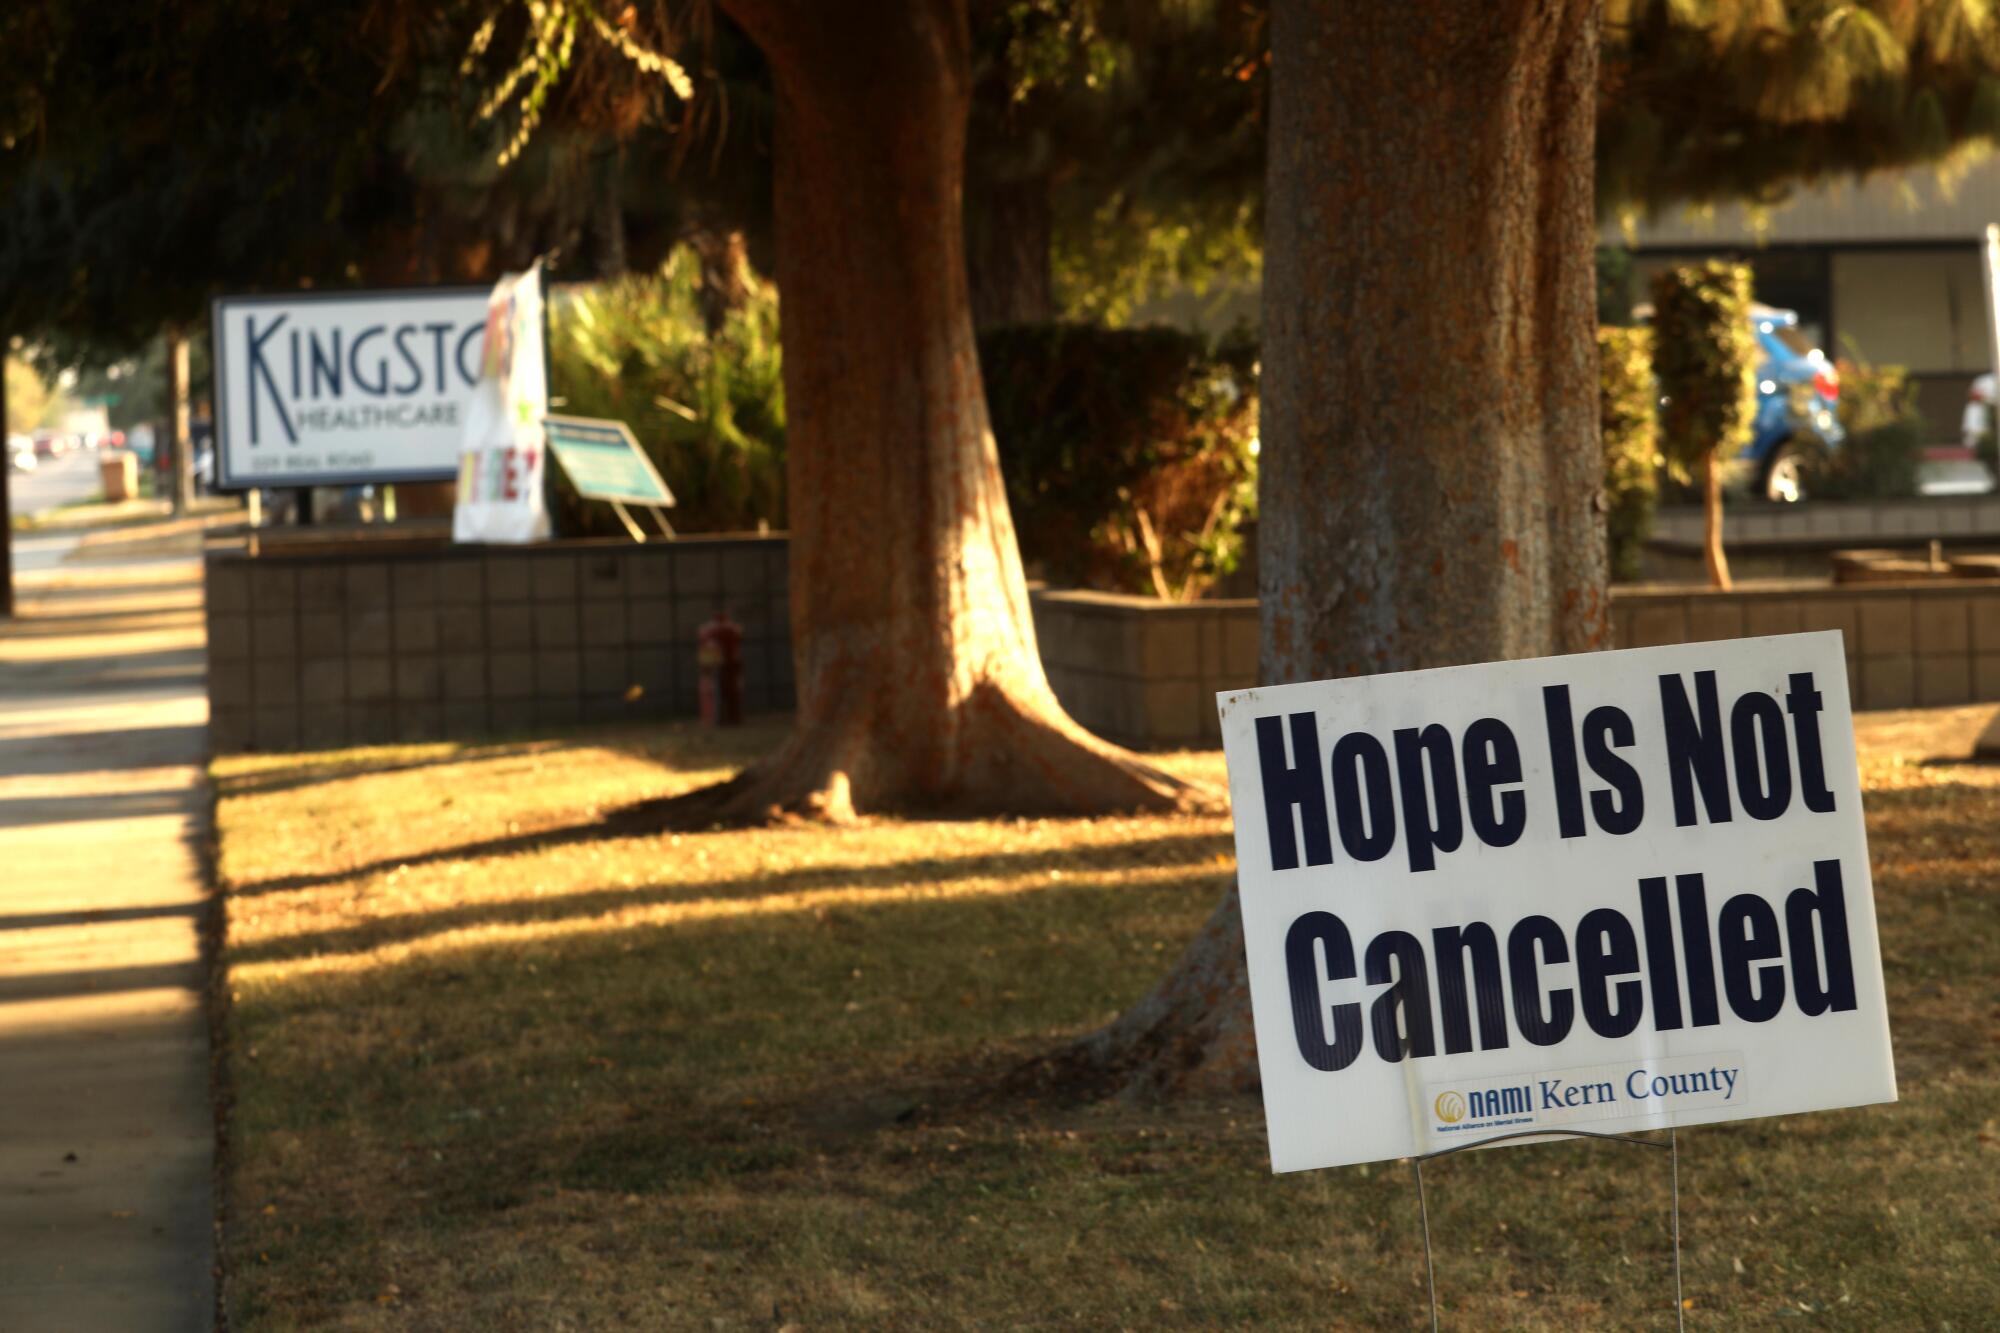  A sign staked on the grass outside Kingston Healthcare Center reads "Hope is not cancelled."